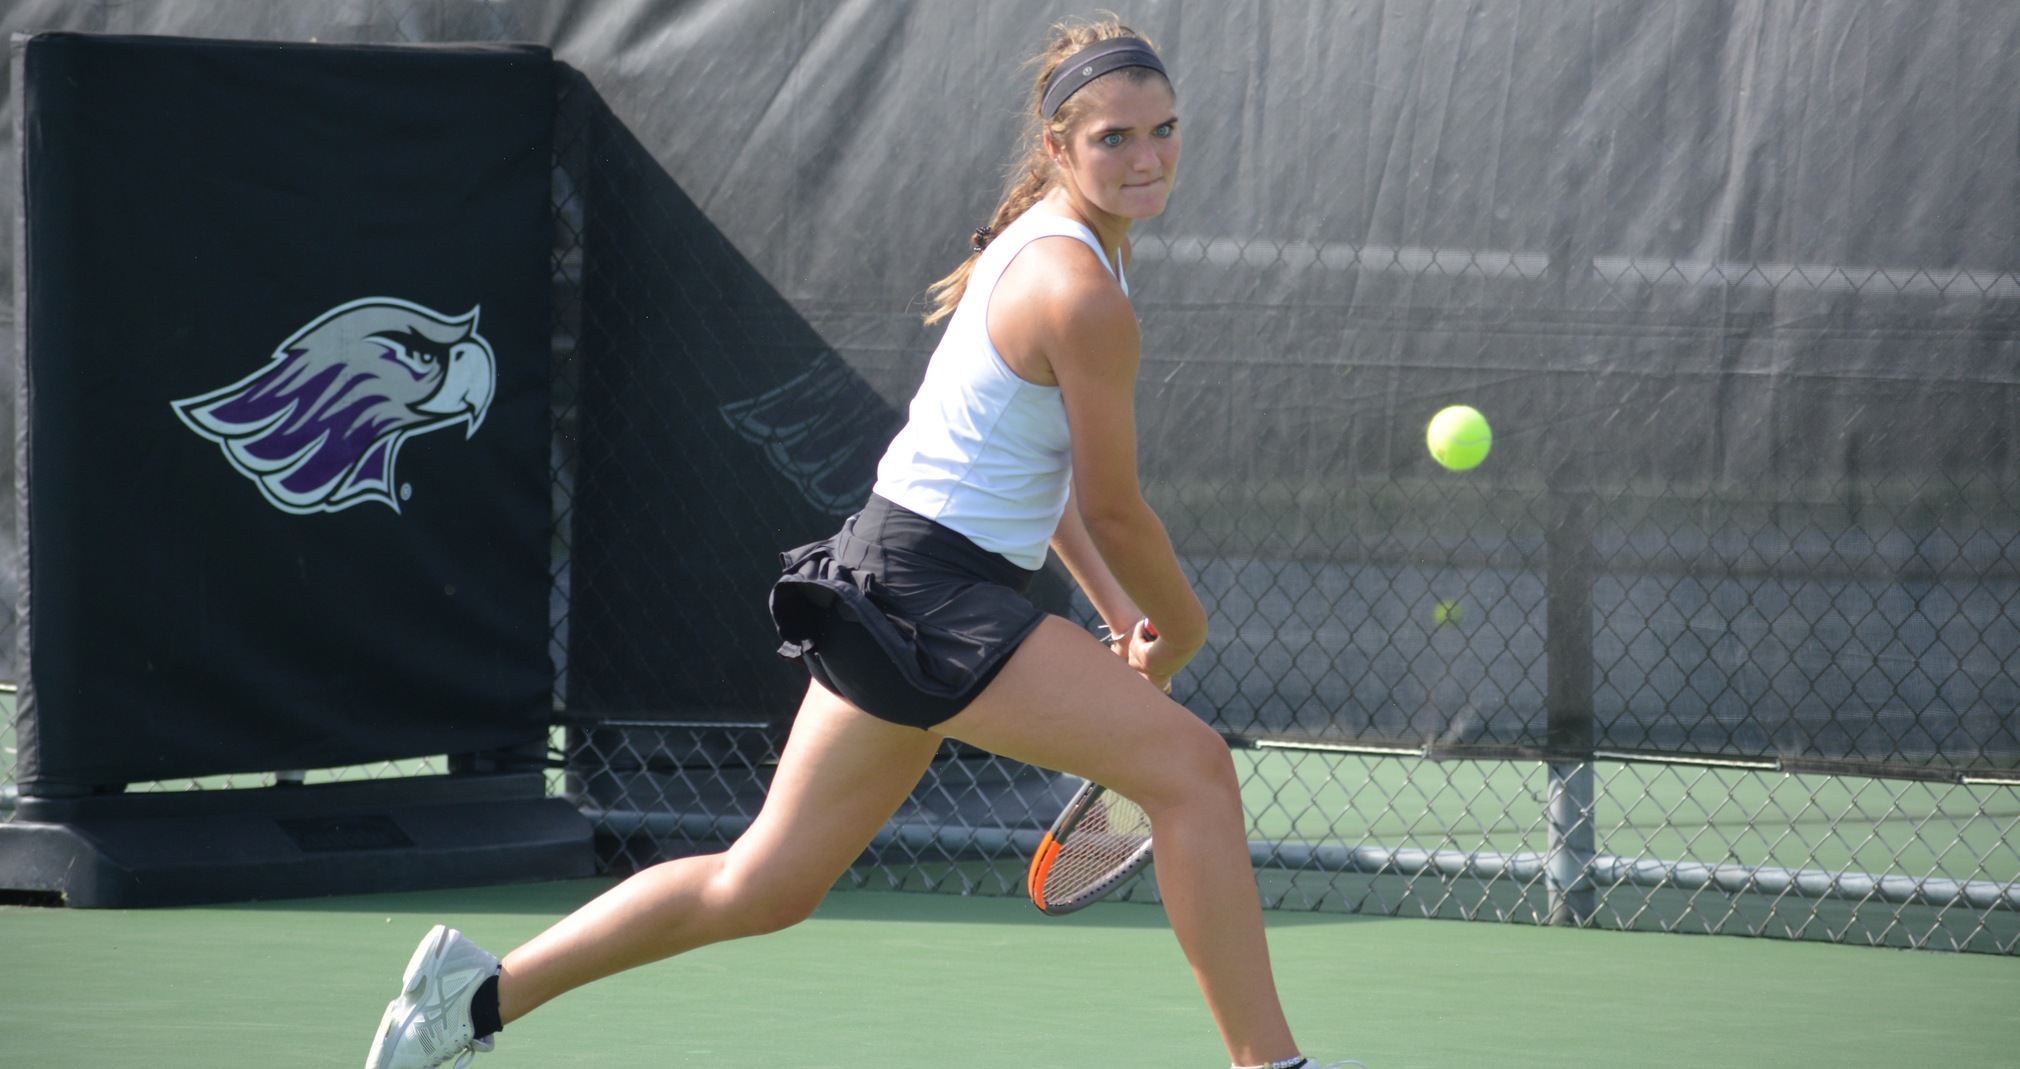 Alyssa Leffler competed at No. 1 singles and No. 2 doubles against the Warhawks.